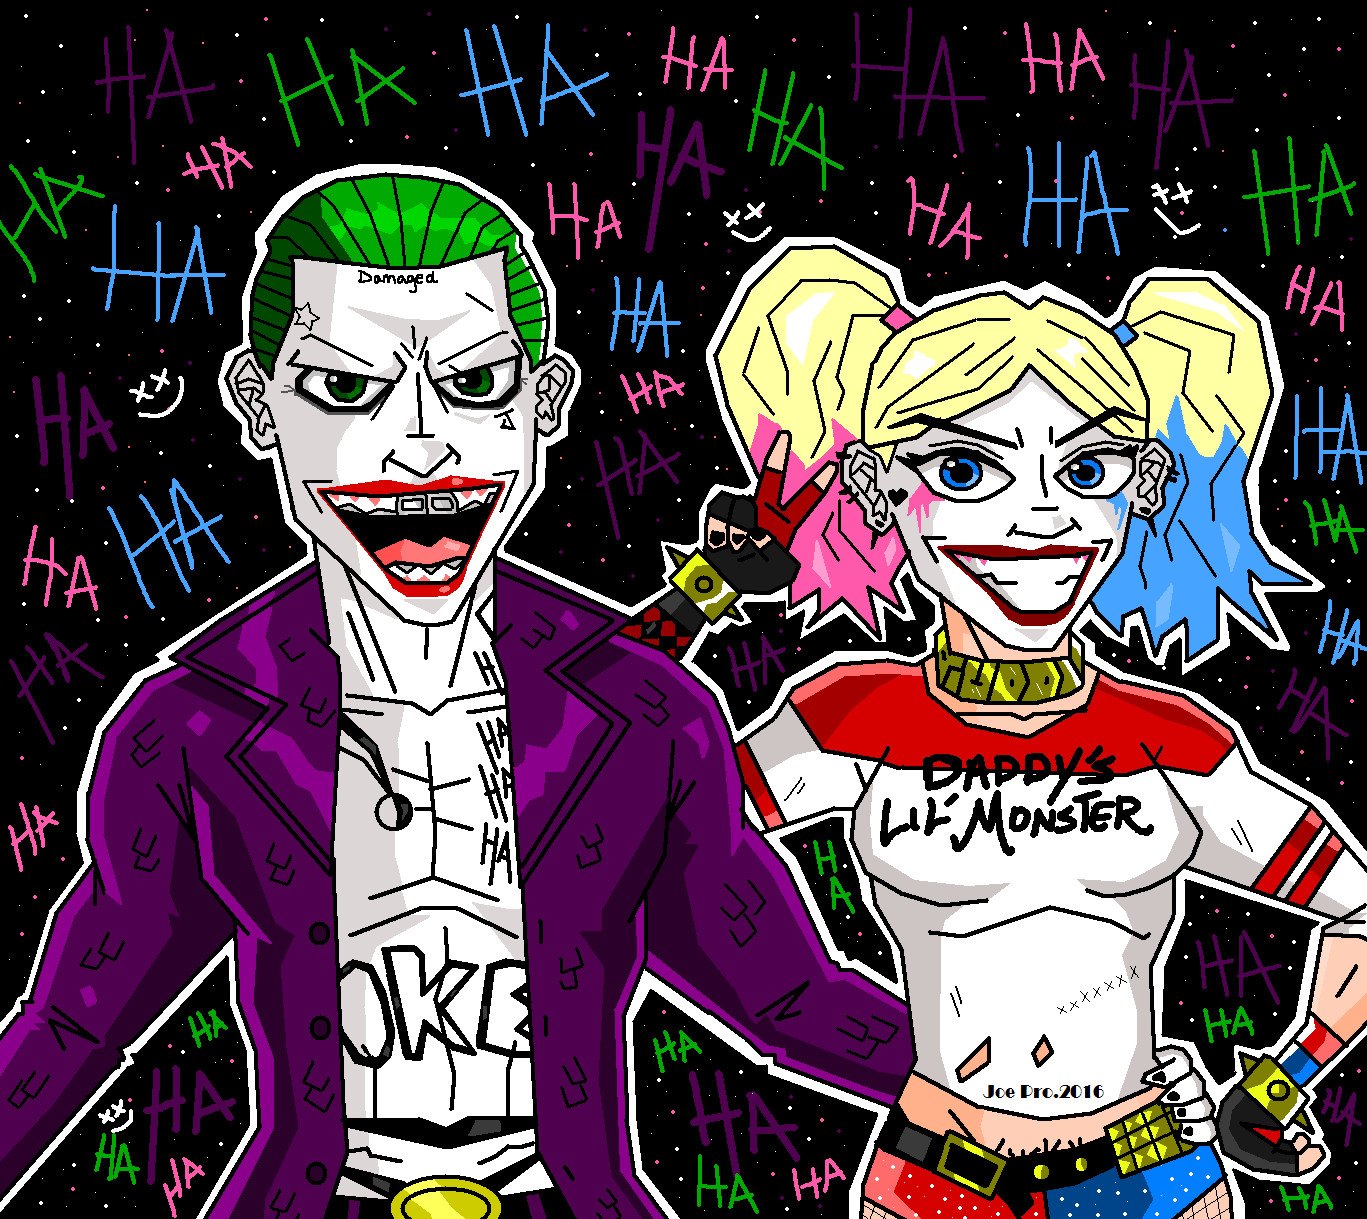 JoeProCEO's Joker and Harley Quinn by JoeProCeo on DeviantArt